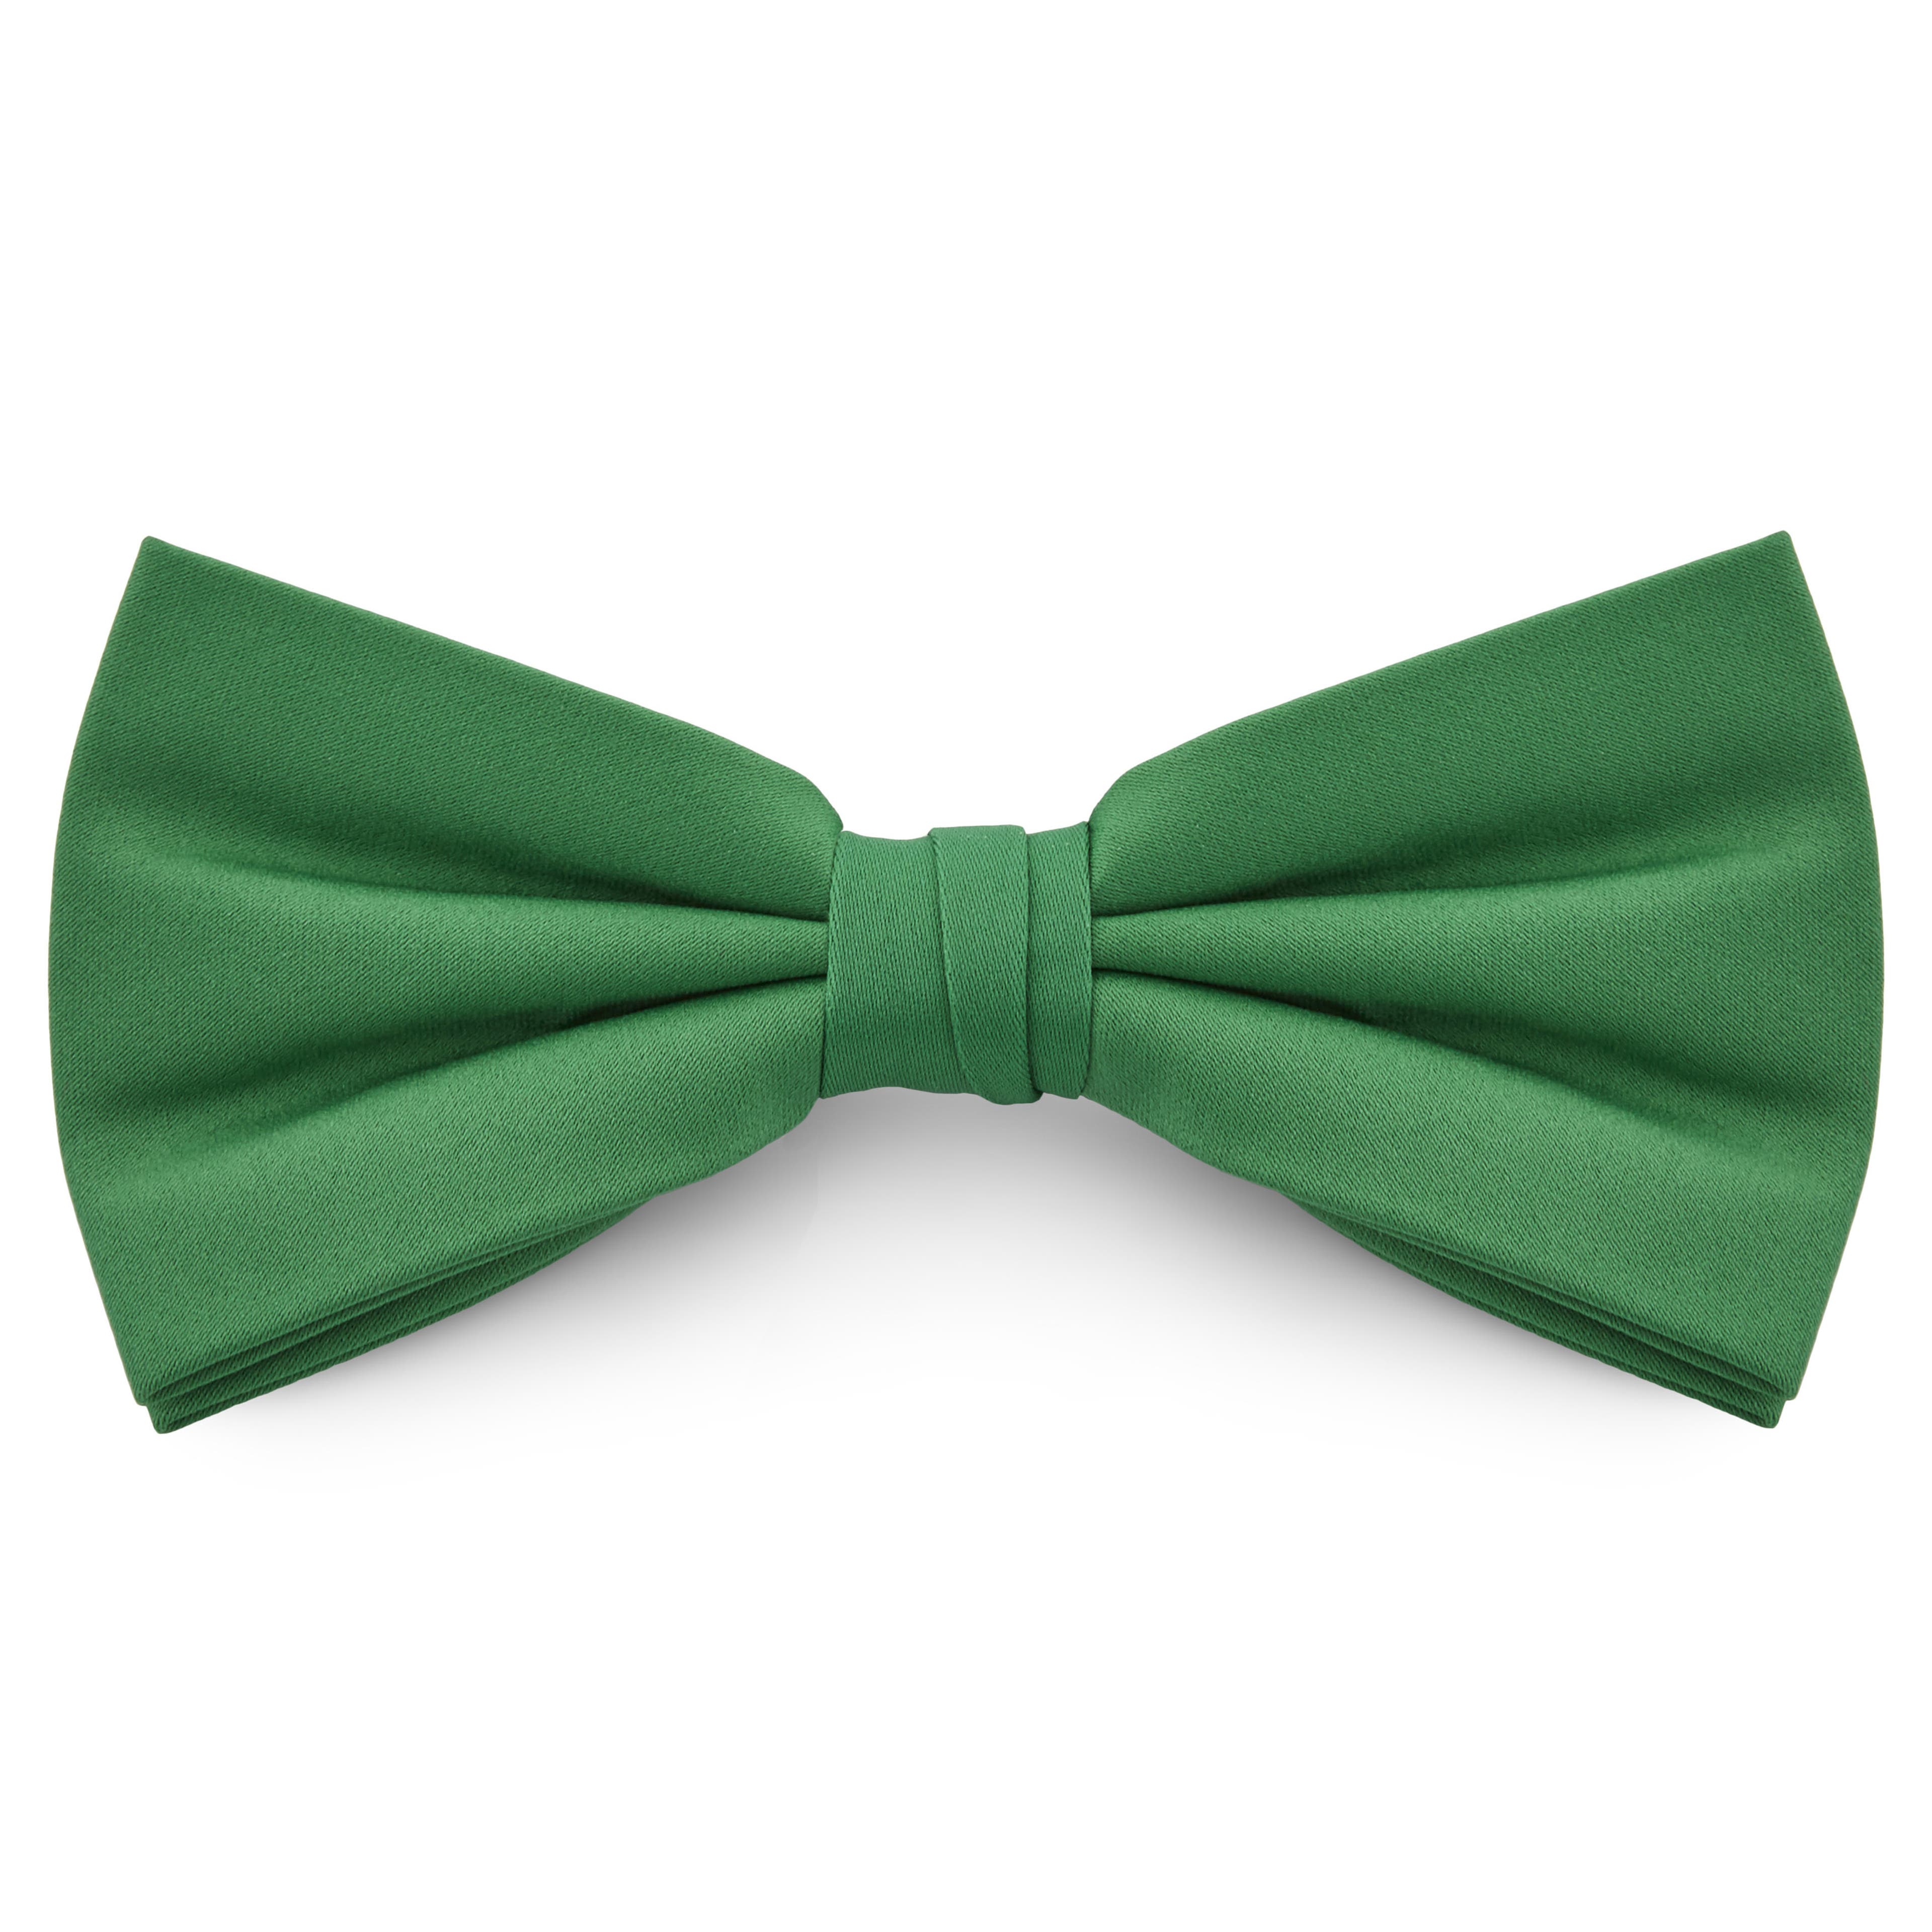 XL Emerald Green Basic Pre-Tied Bow Tie, In stock!